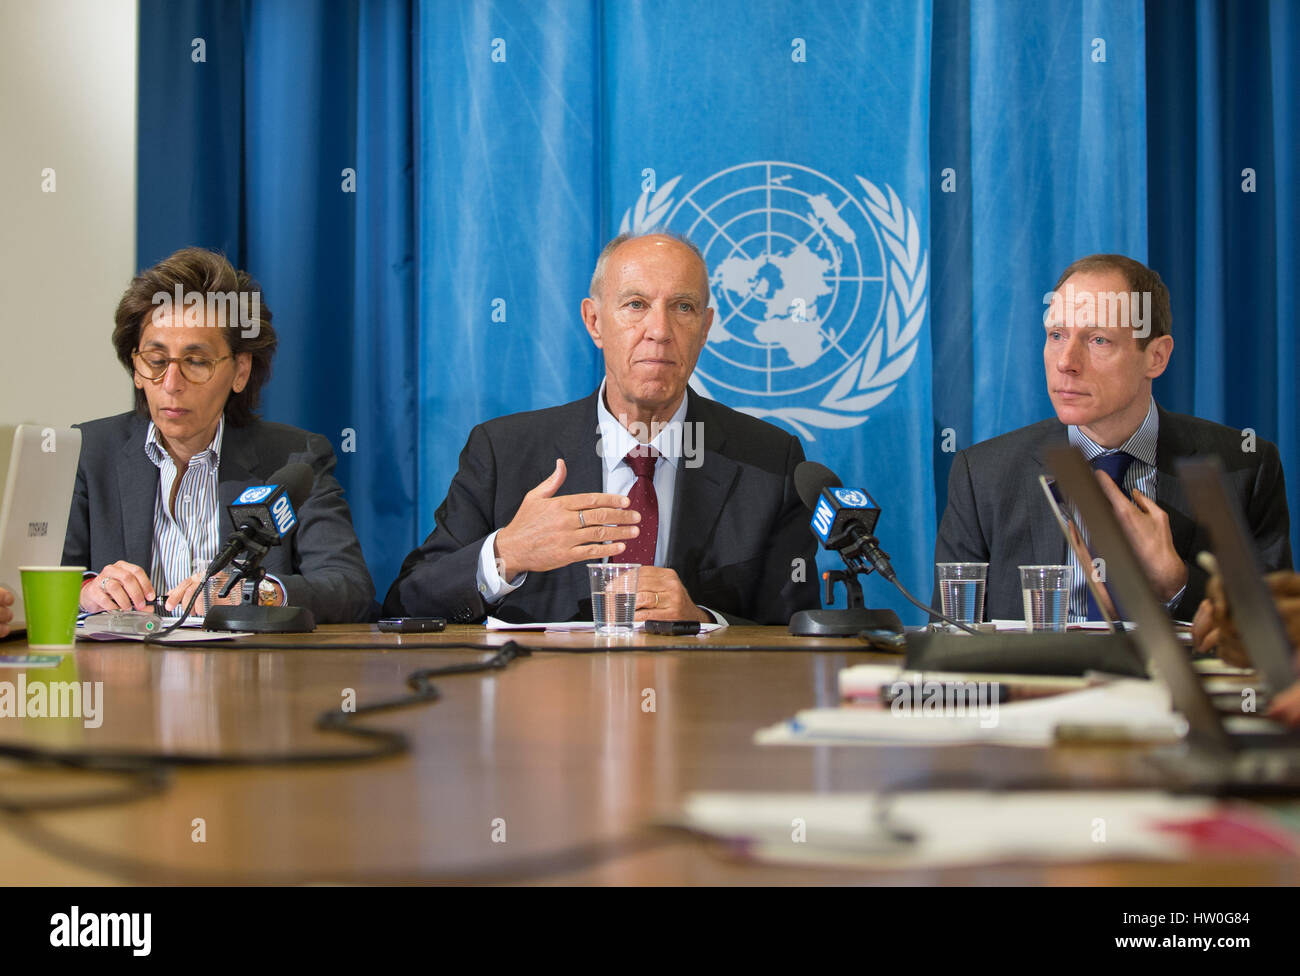 Geneva, Switzerland. 15th Mar, 2017. World Intellectual Property Organization (WIPO) Director General Francis Gurry (C) addresses a press conference in Geneva, Switzerland, March 15, 2017. Francis Gurry on Wednesday lauded China's strong performance in international patent and trademark filing. The WIPO revealed that China filed 43,168 applications under the organization's patent cooperation treaty (PCT) in 2016, up from 29,839 two years ago. Credit: Xu Jinquan/Xinhua/Alamy Live News Stock Photo